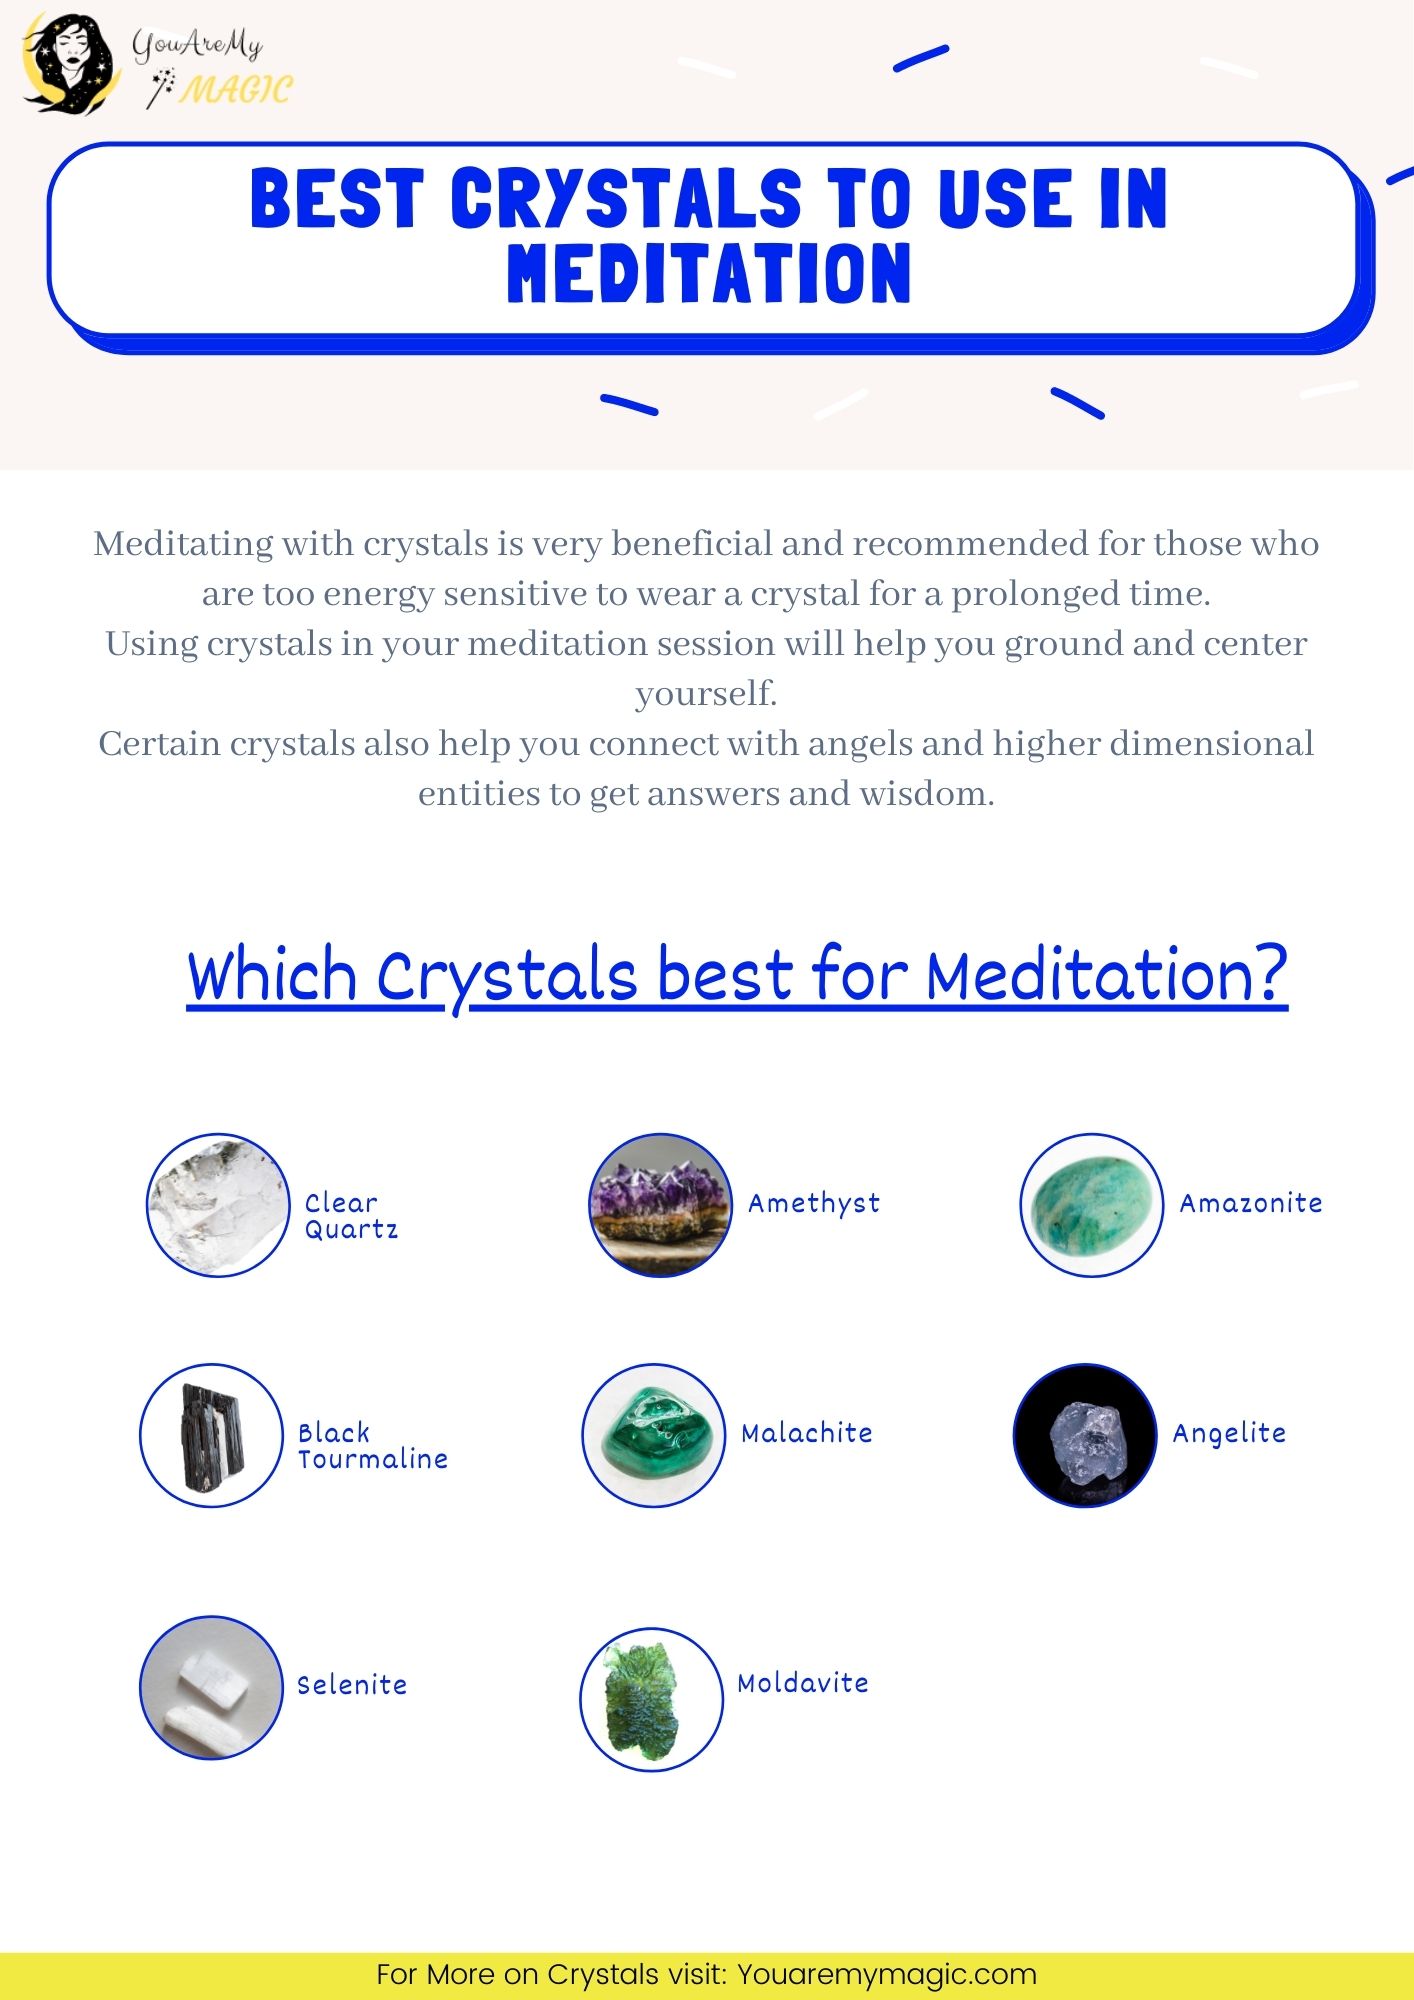 Best crystals to use in Meditation